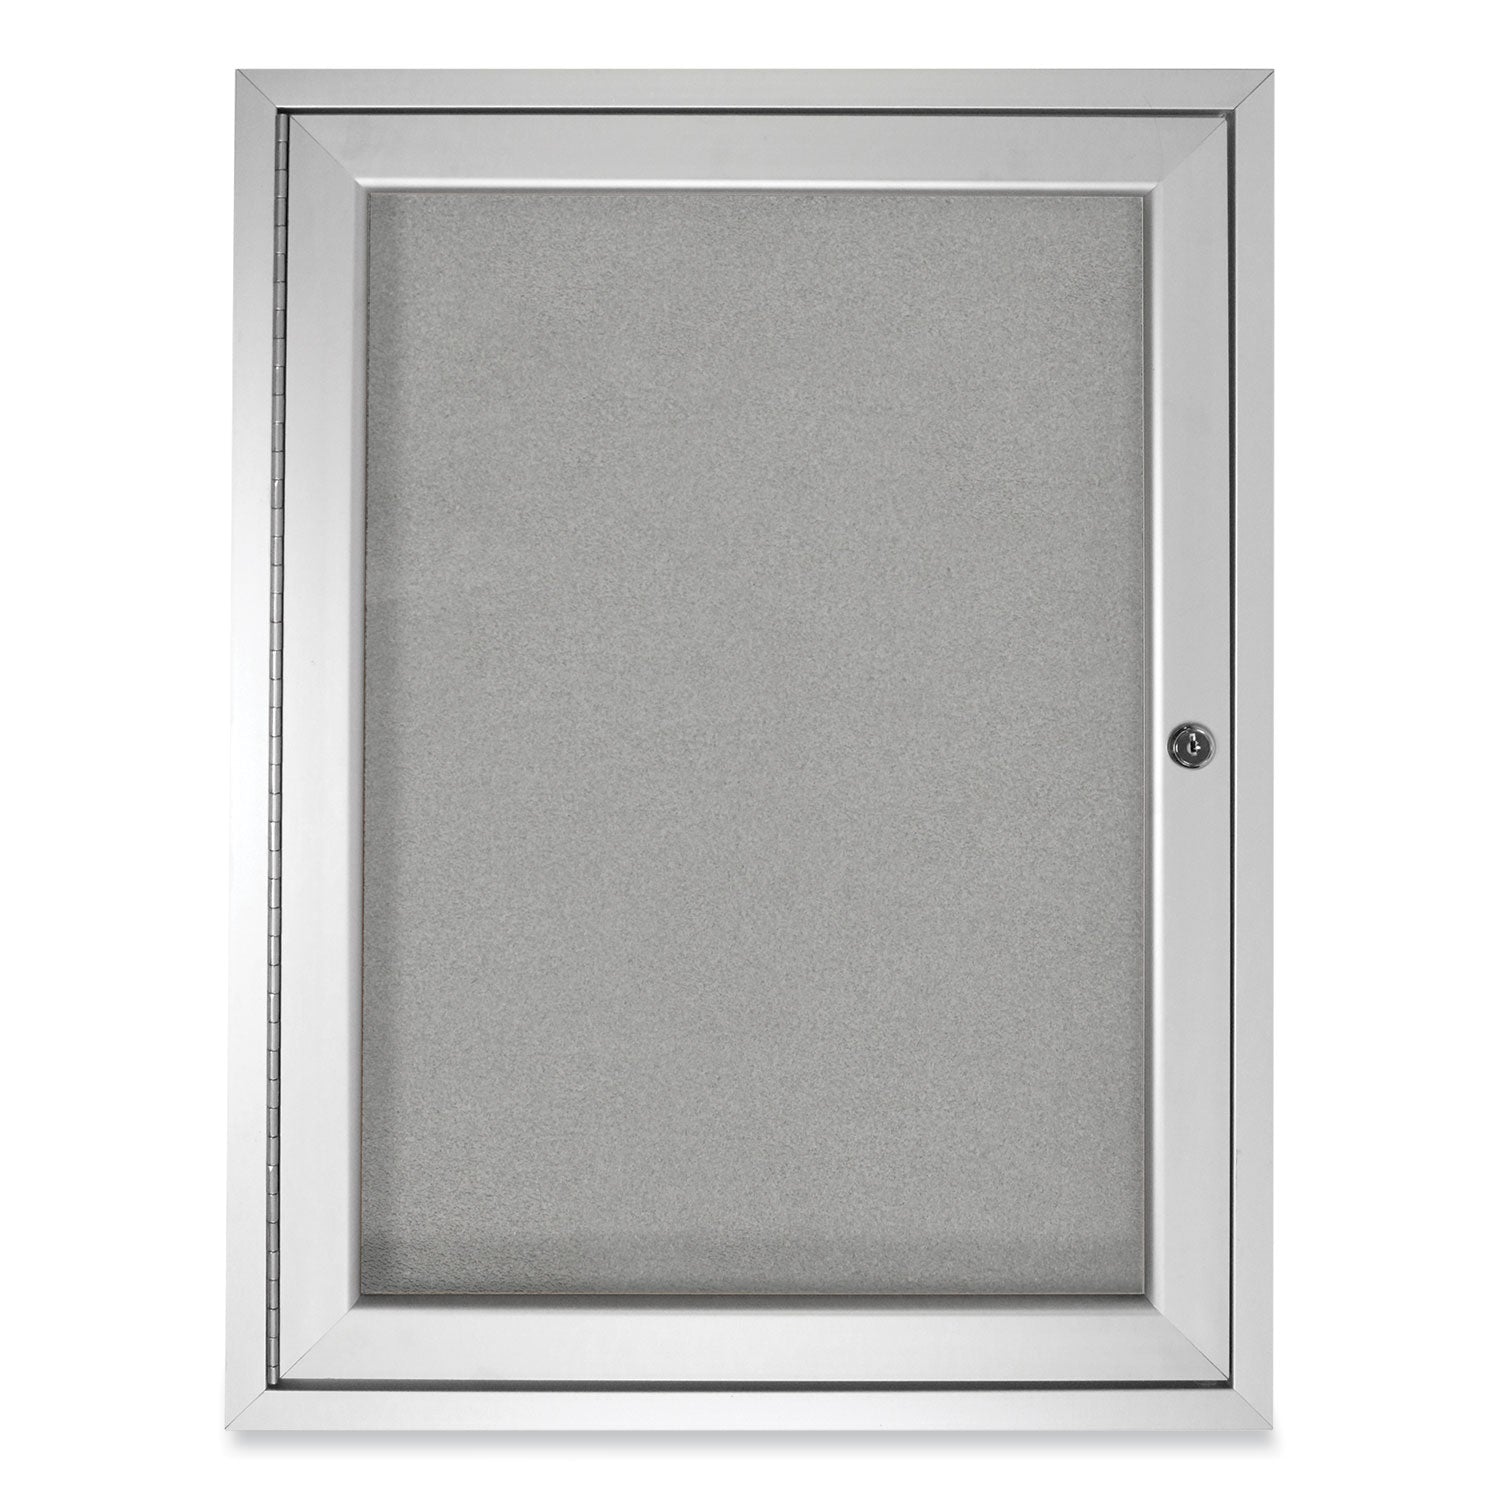 1-door-enclosed-vinyl-bulletin-board-with-satin-aluminum-frame-36-x-36-silver-surface-ships-in-7-10-business-days_ghepa13636vx193 - 1